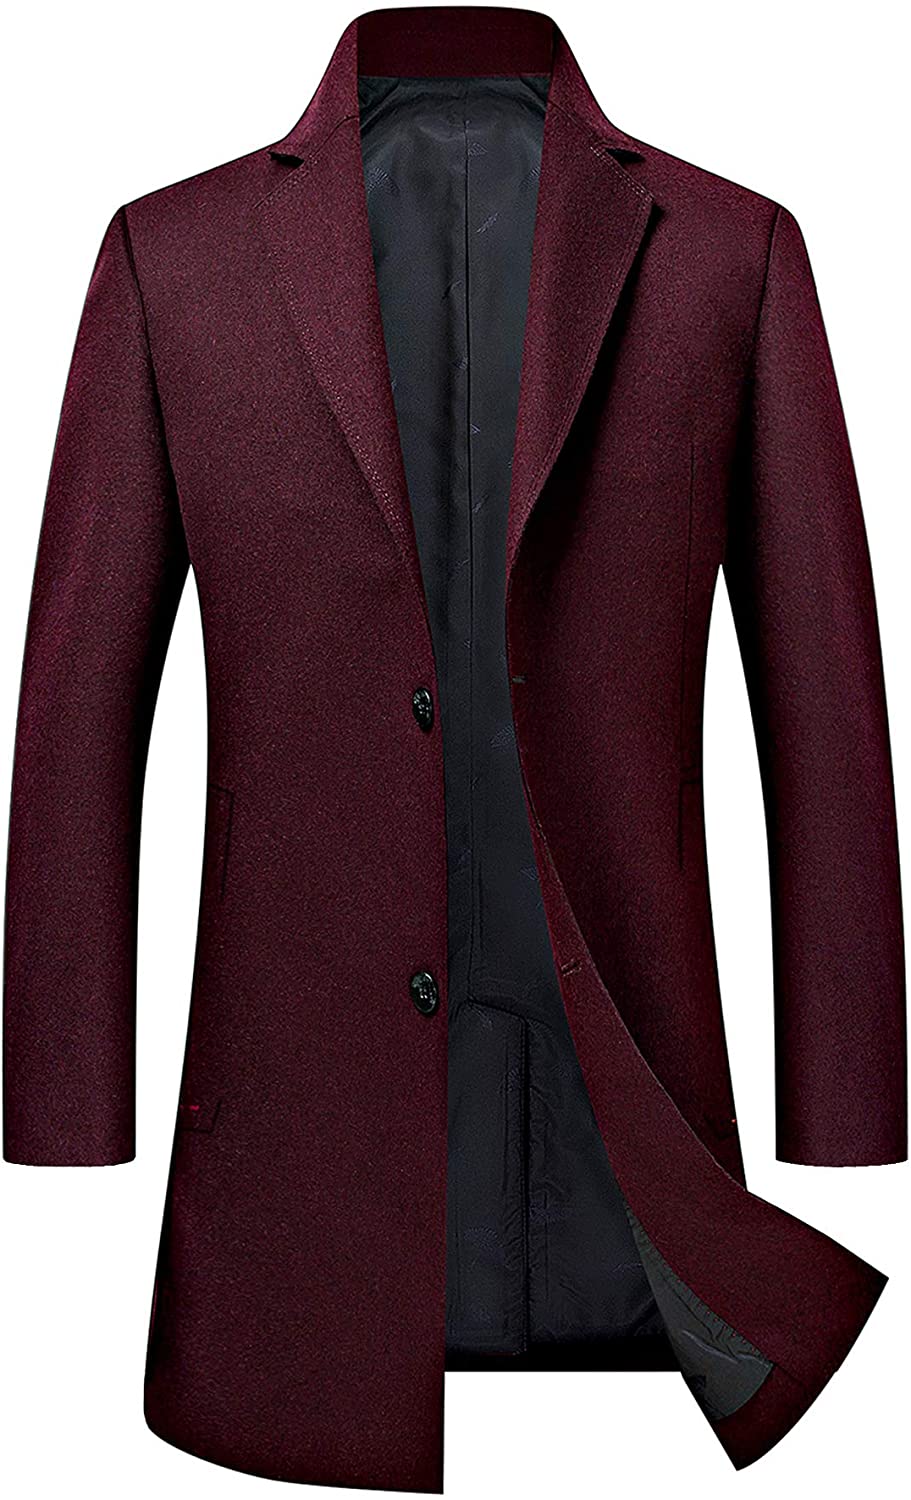 Men's Trench Coat Wool Blend Slim Fit Jacket Single Breasted Business ...